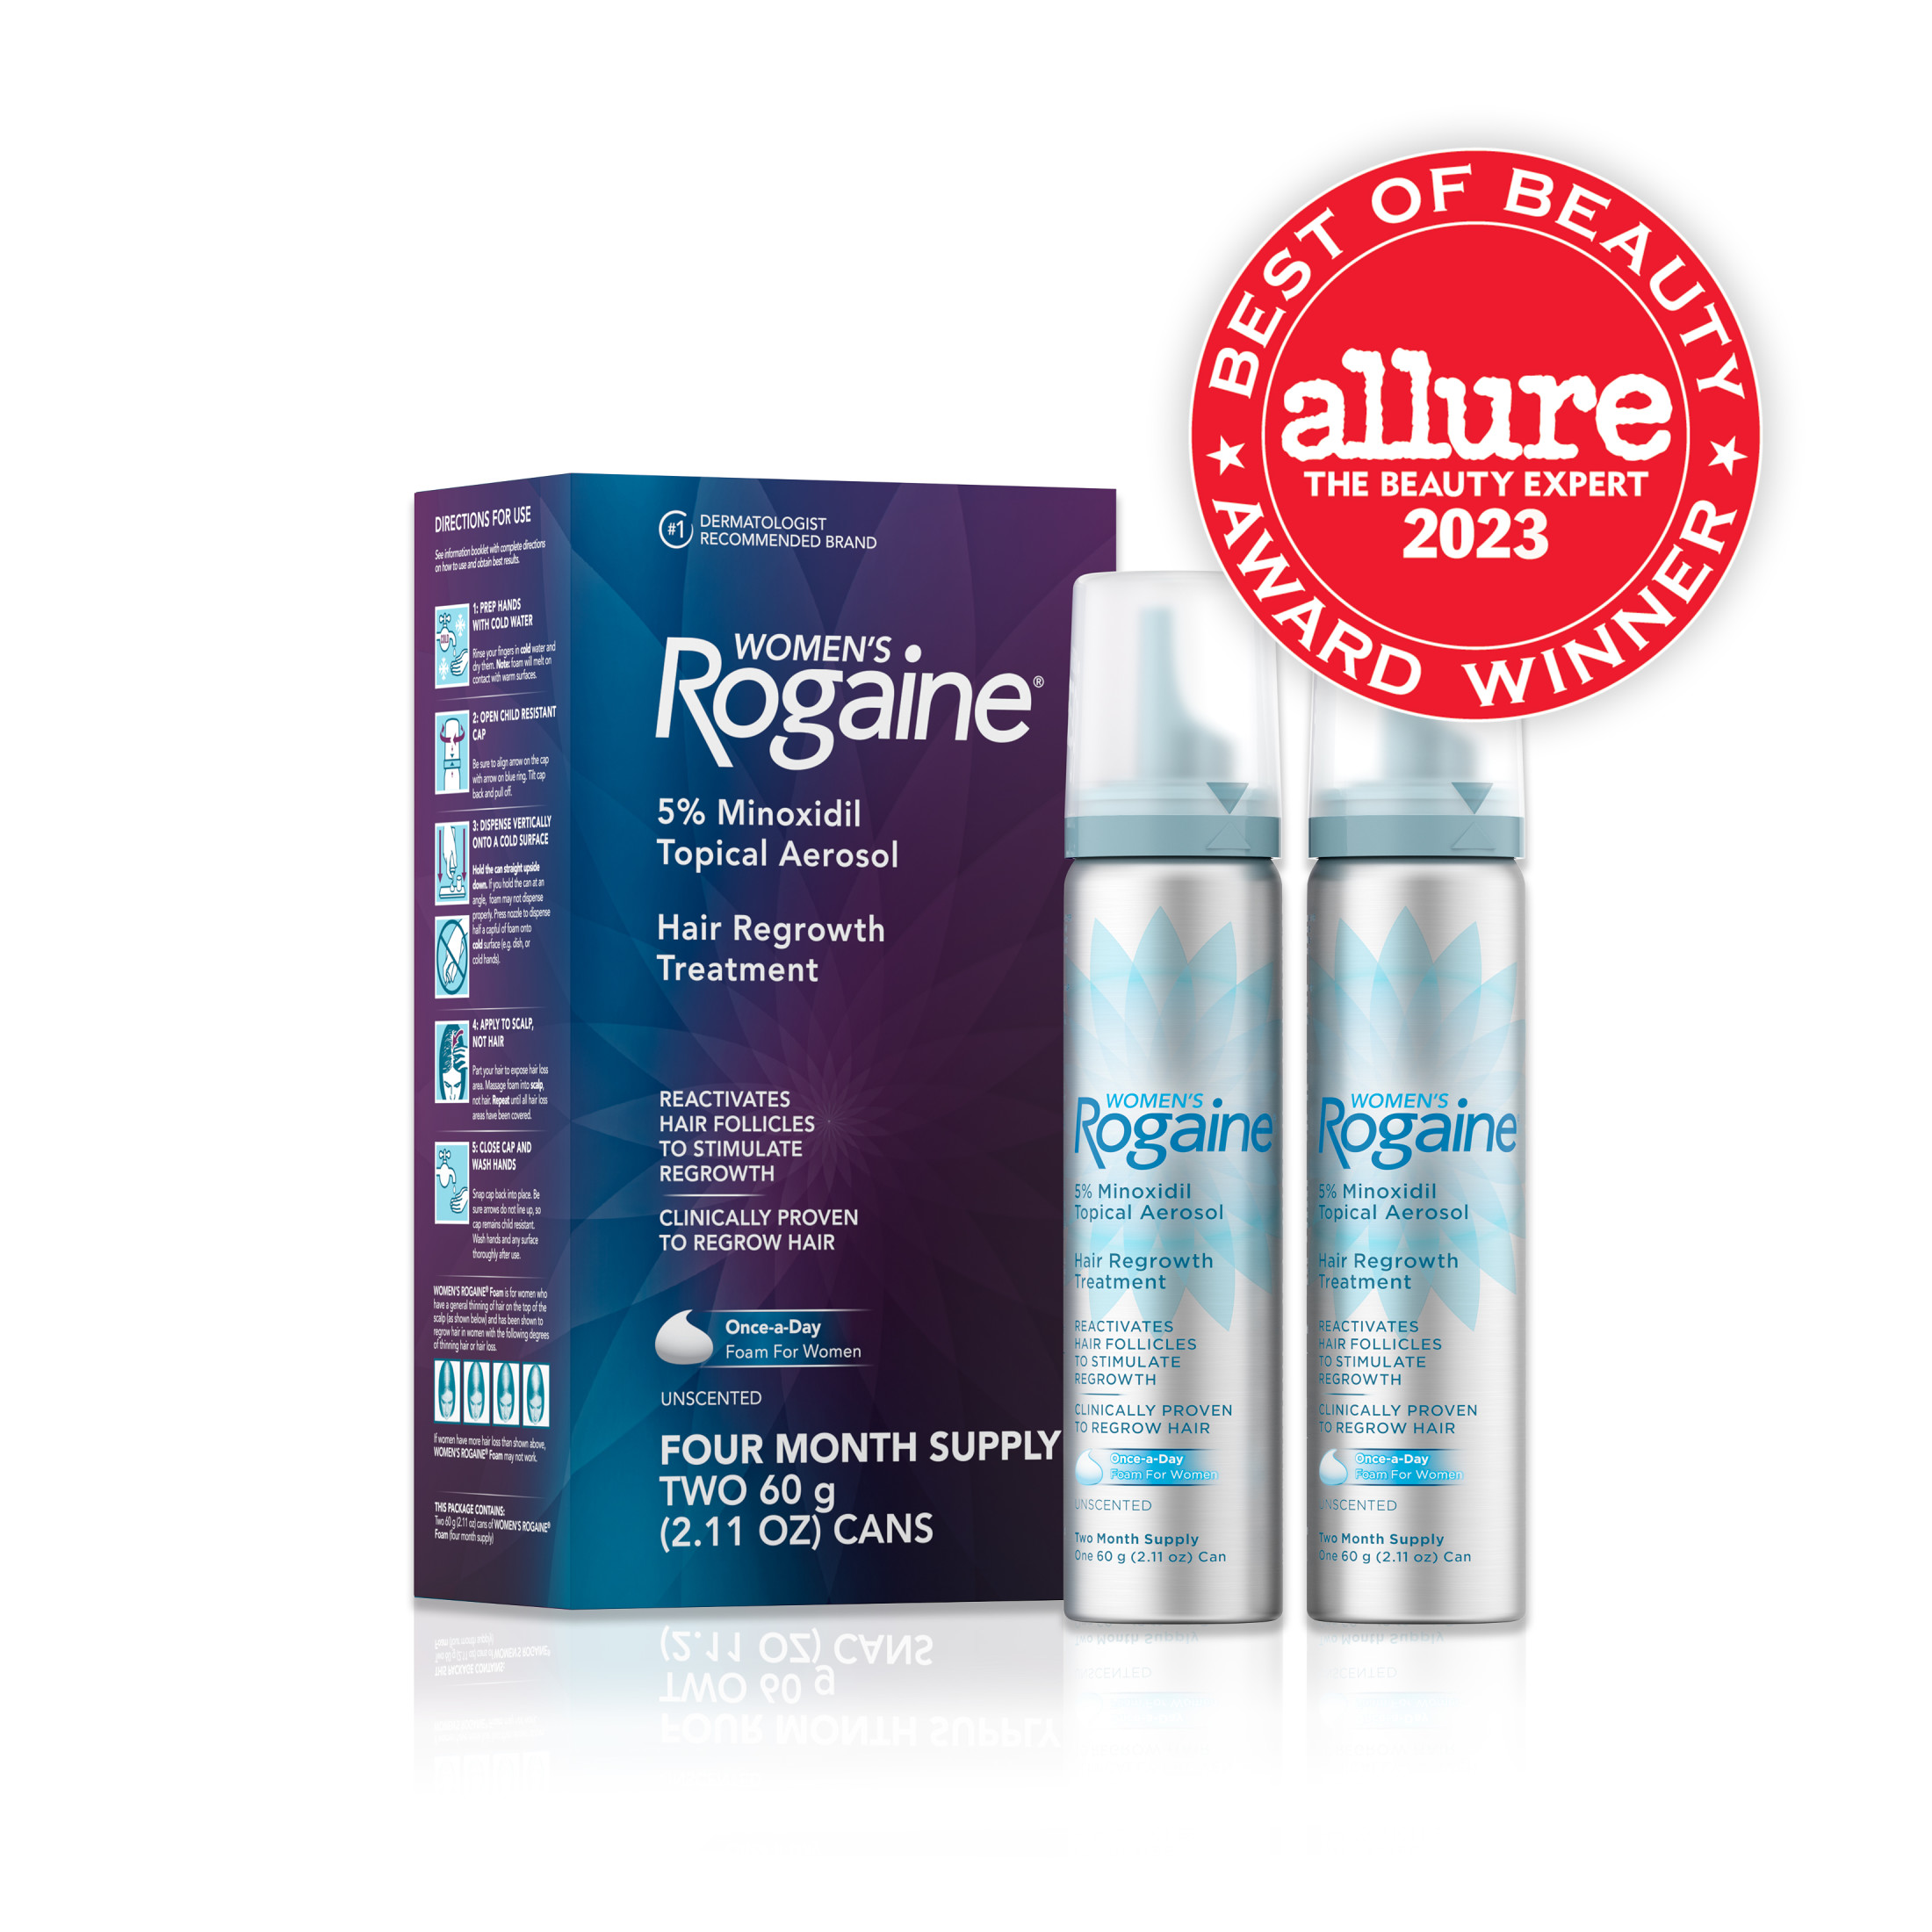 Women's Rogaine 5% Minoxidil Foam, Unscented, 4-Month Supply - image 2 of 8